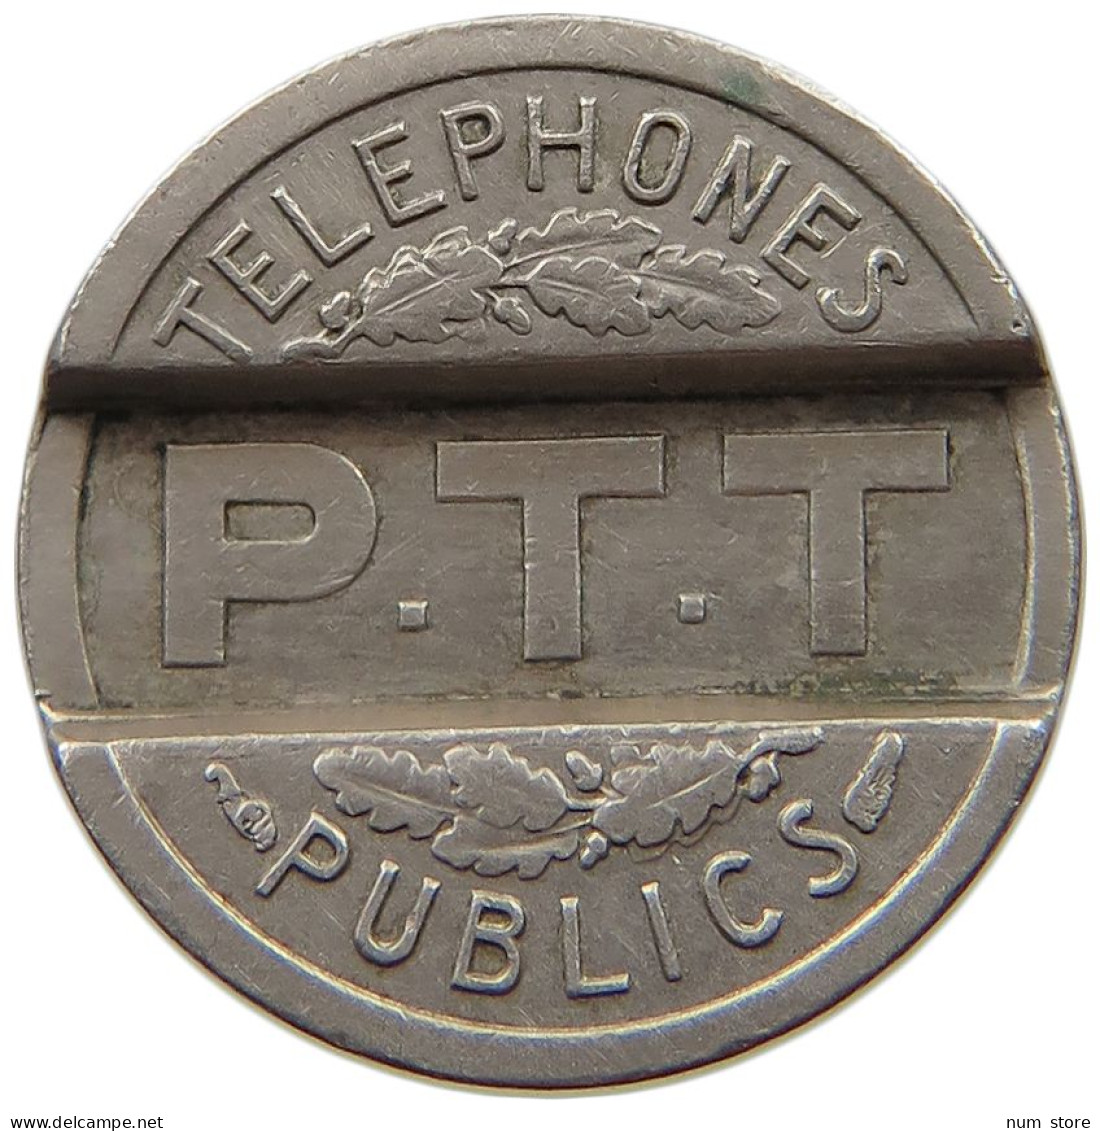 FRANCE PHONE TOKEN 1937 #a090 0459 - 1 Centime